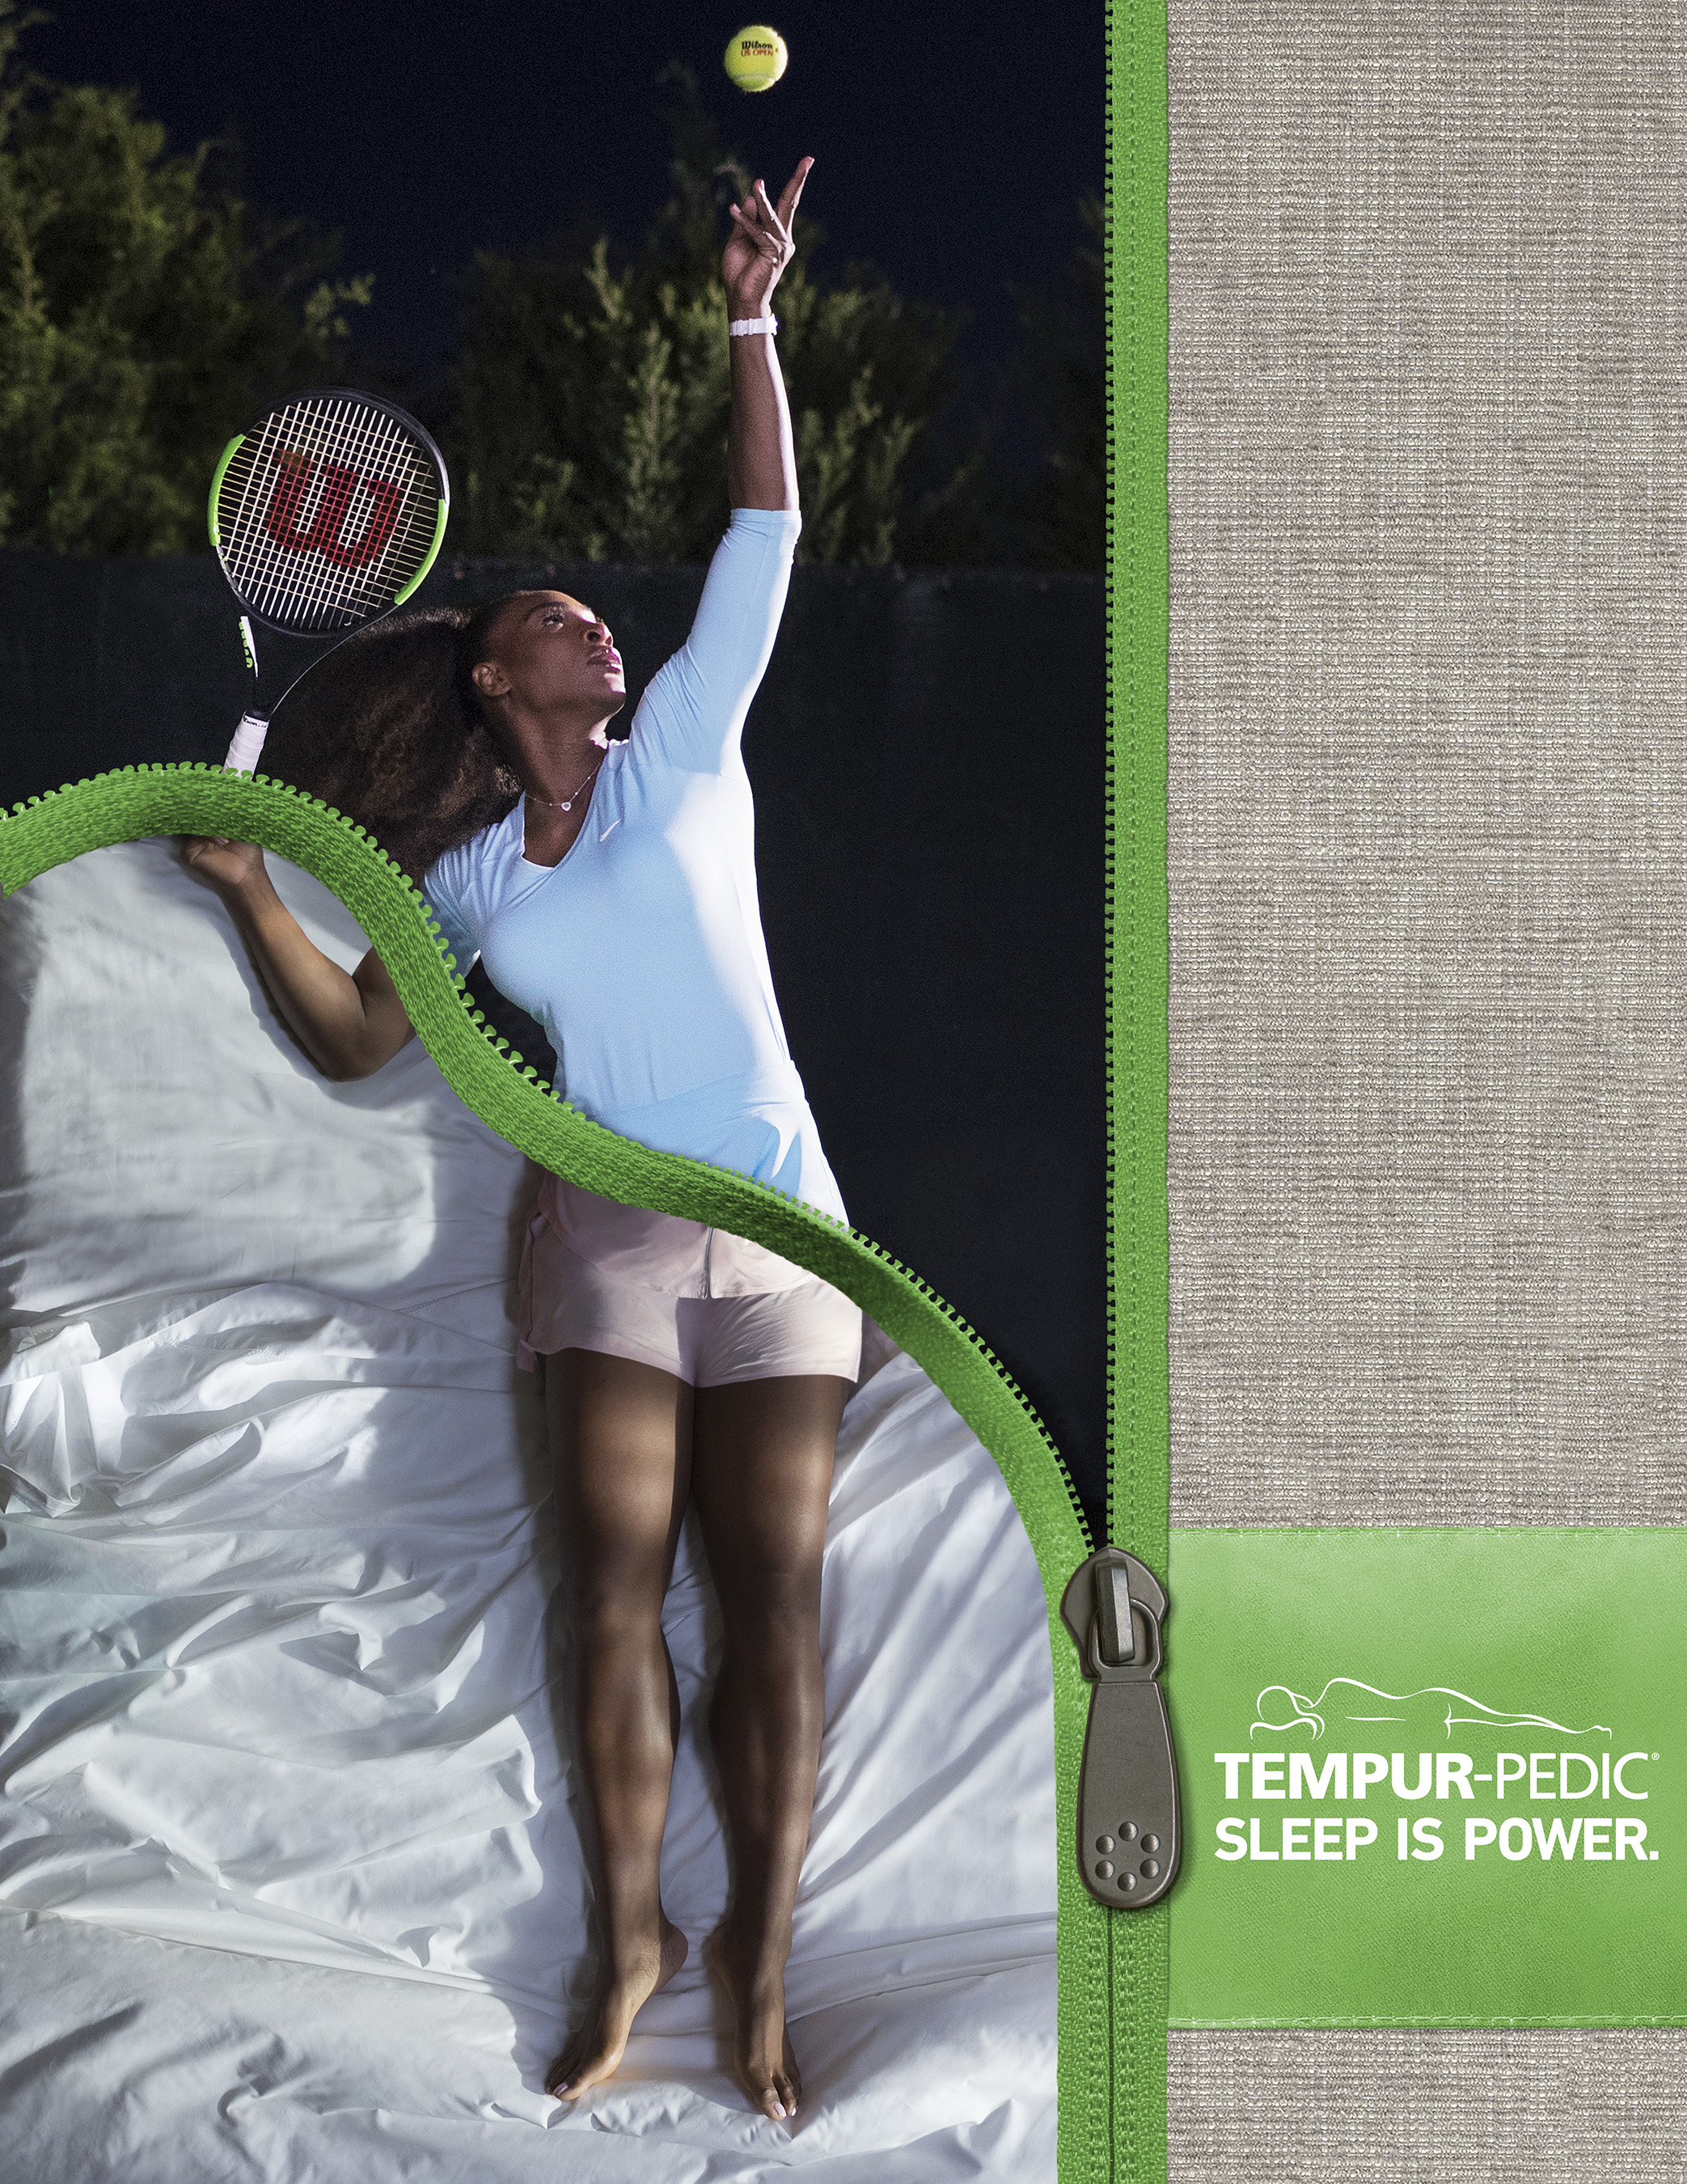 Serena Williams, in collaboration with Tempur-Pedic as part of the brand’s new integrated marketing campaign, will be featured in television and digital advertising that begin rolling out in May in the United States, Canada and some international markets, including the UK, France, Germany, Netherlands and Australia.